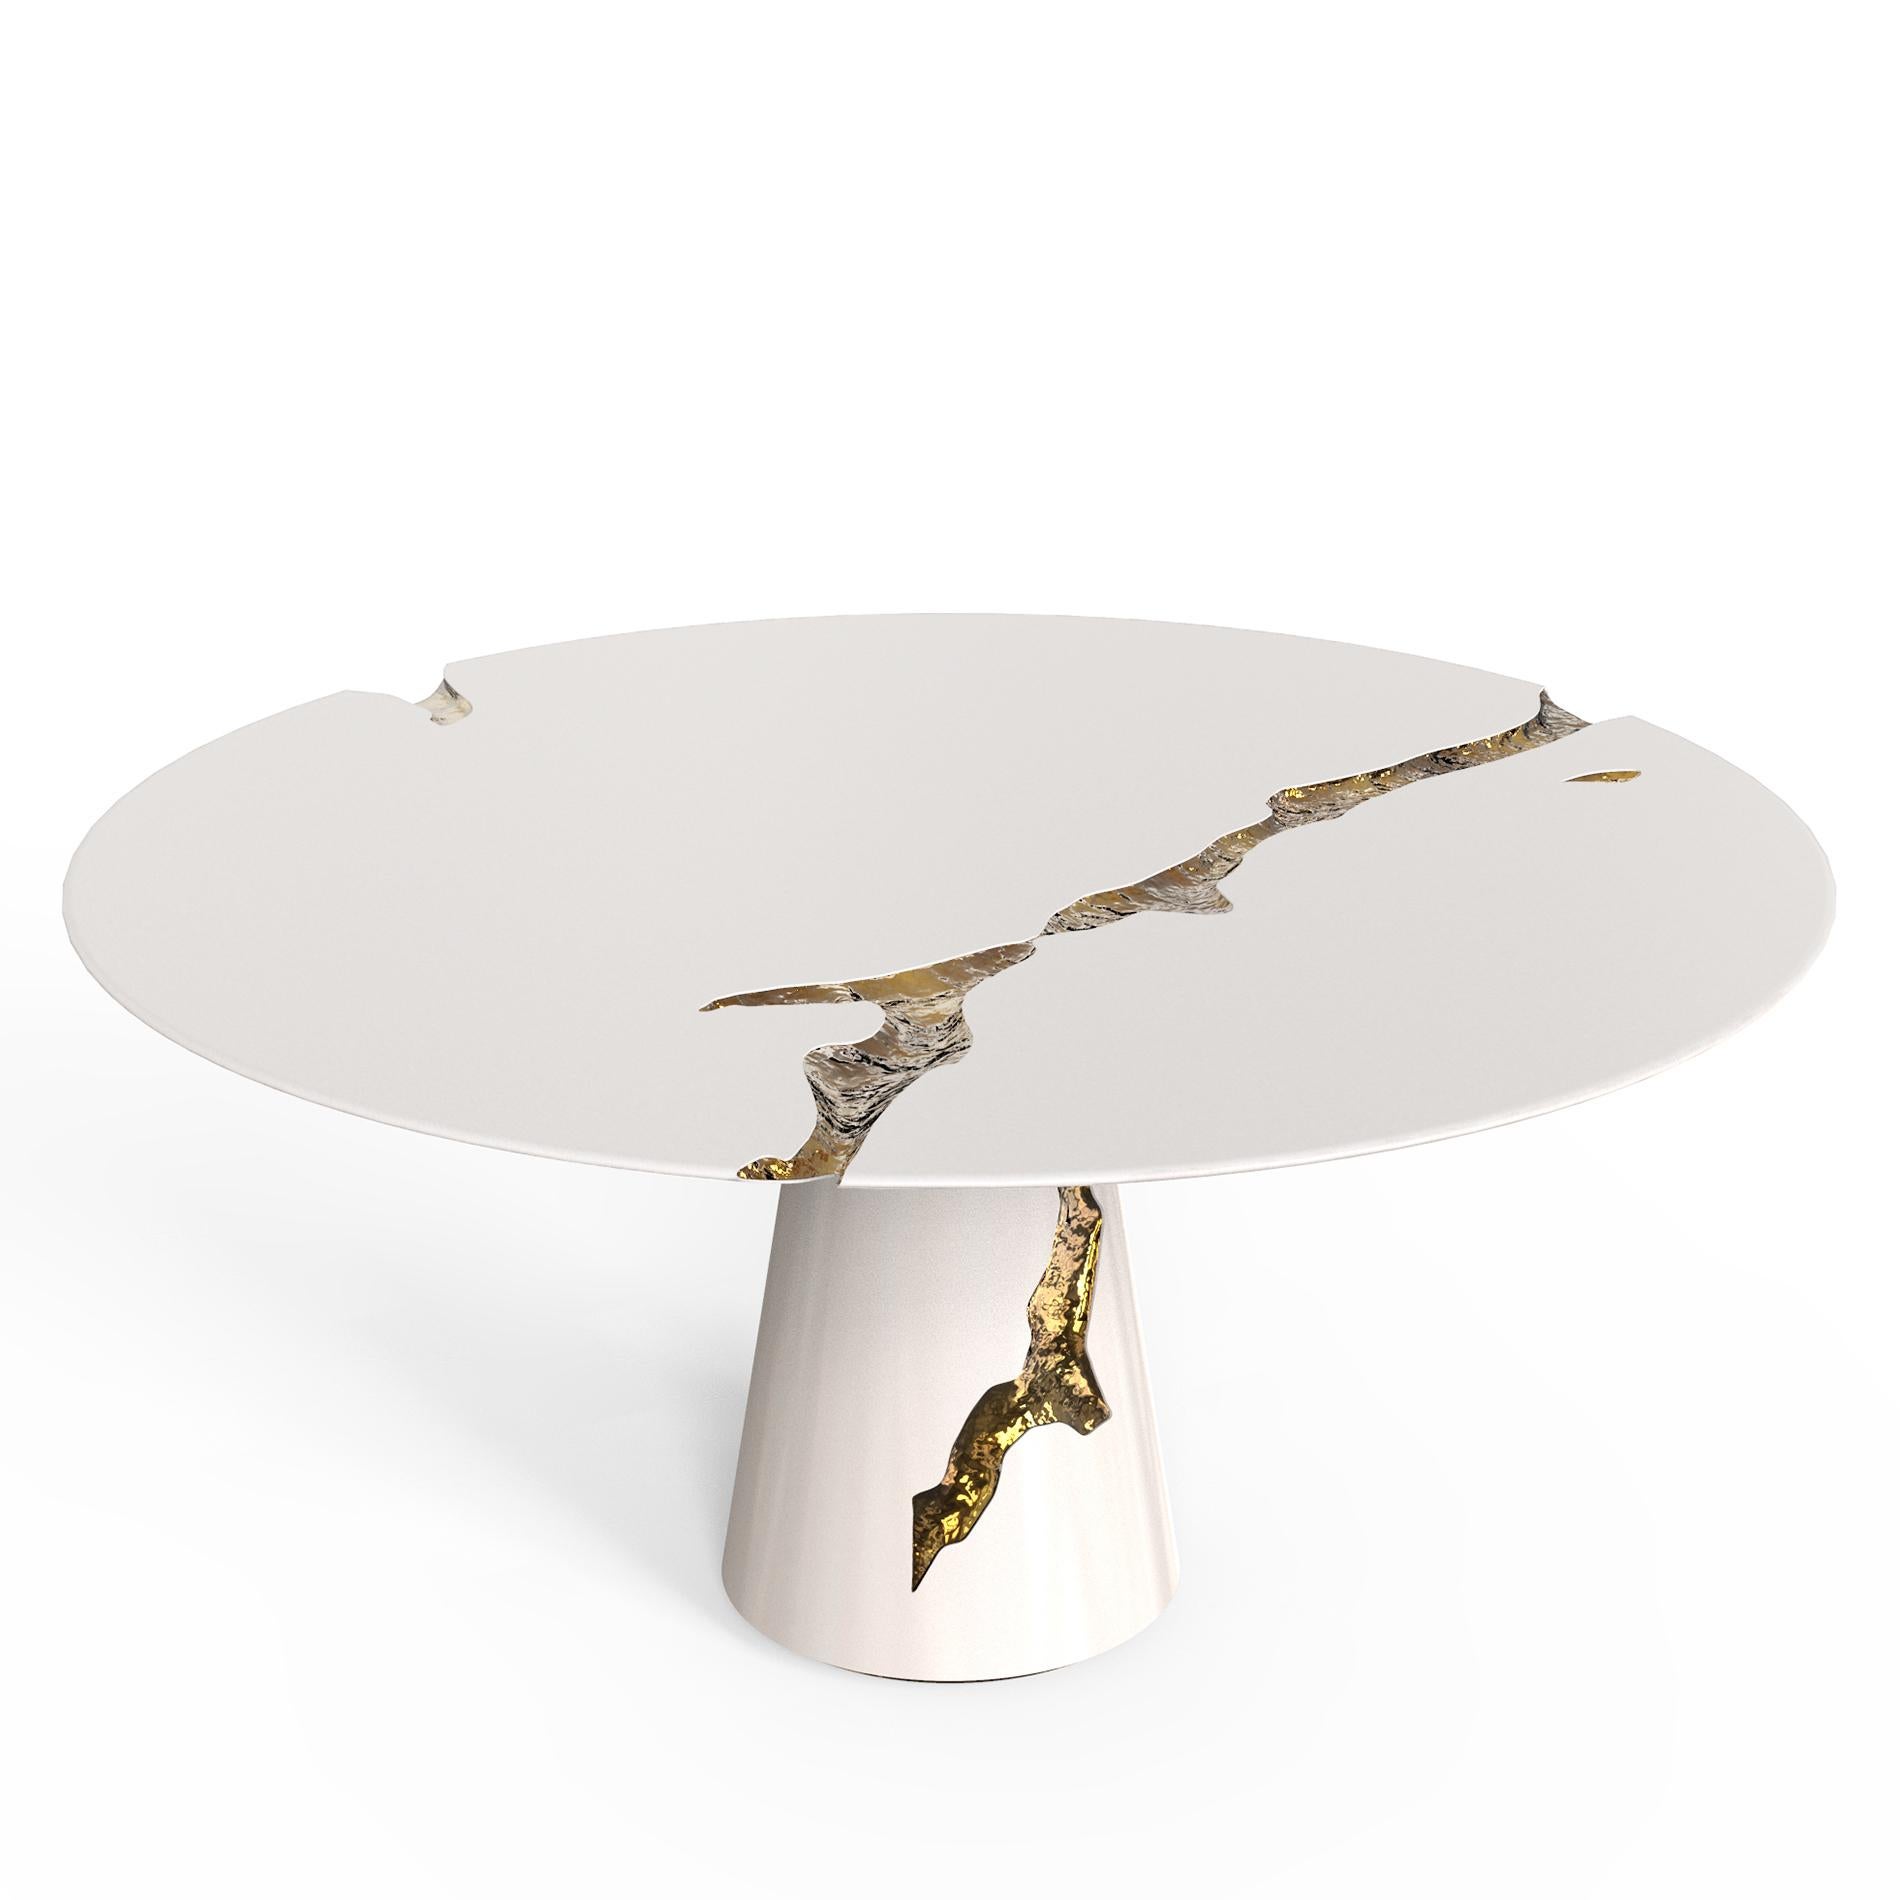 Dining table majestic round white made with mahogany wood
in white lacquered finish. Top and base includes hand carved
parts decorated with handcrafted polished brass leaves.
Also available in black lacquered finish.